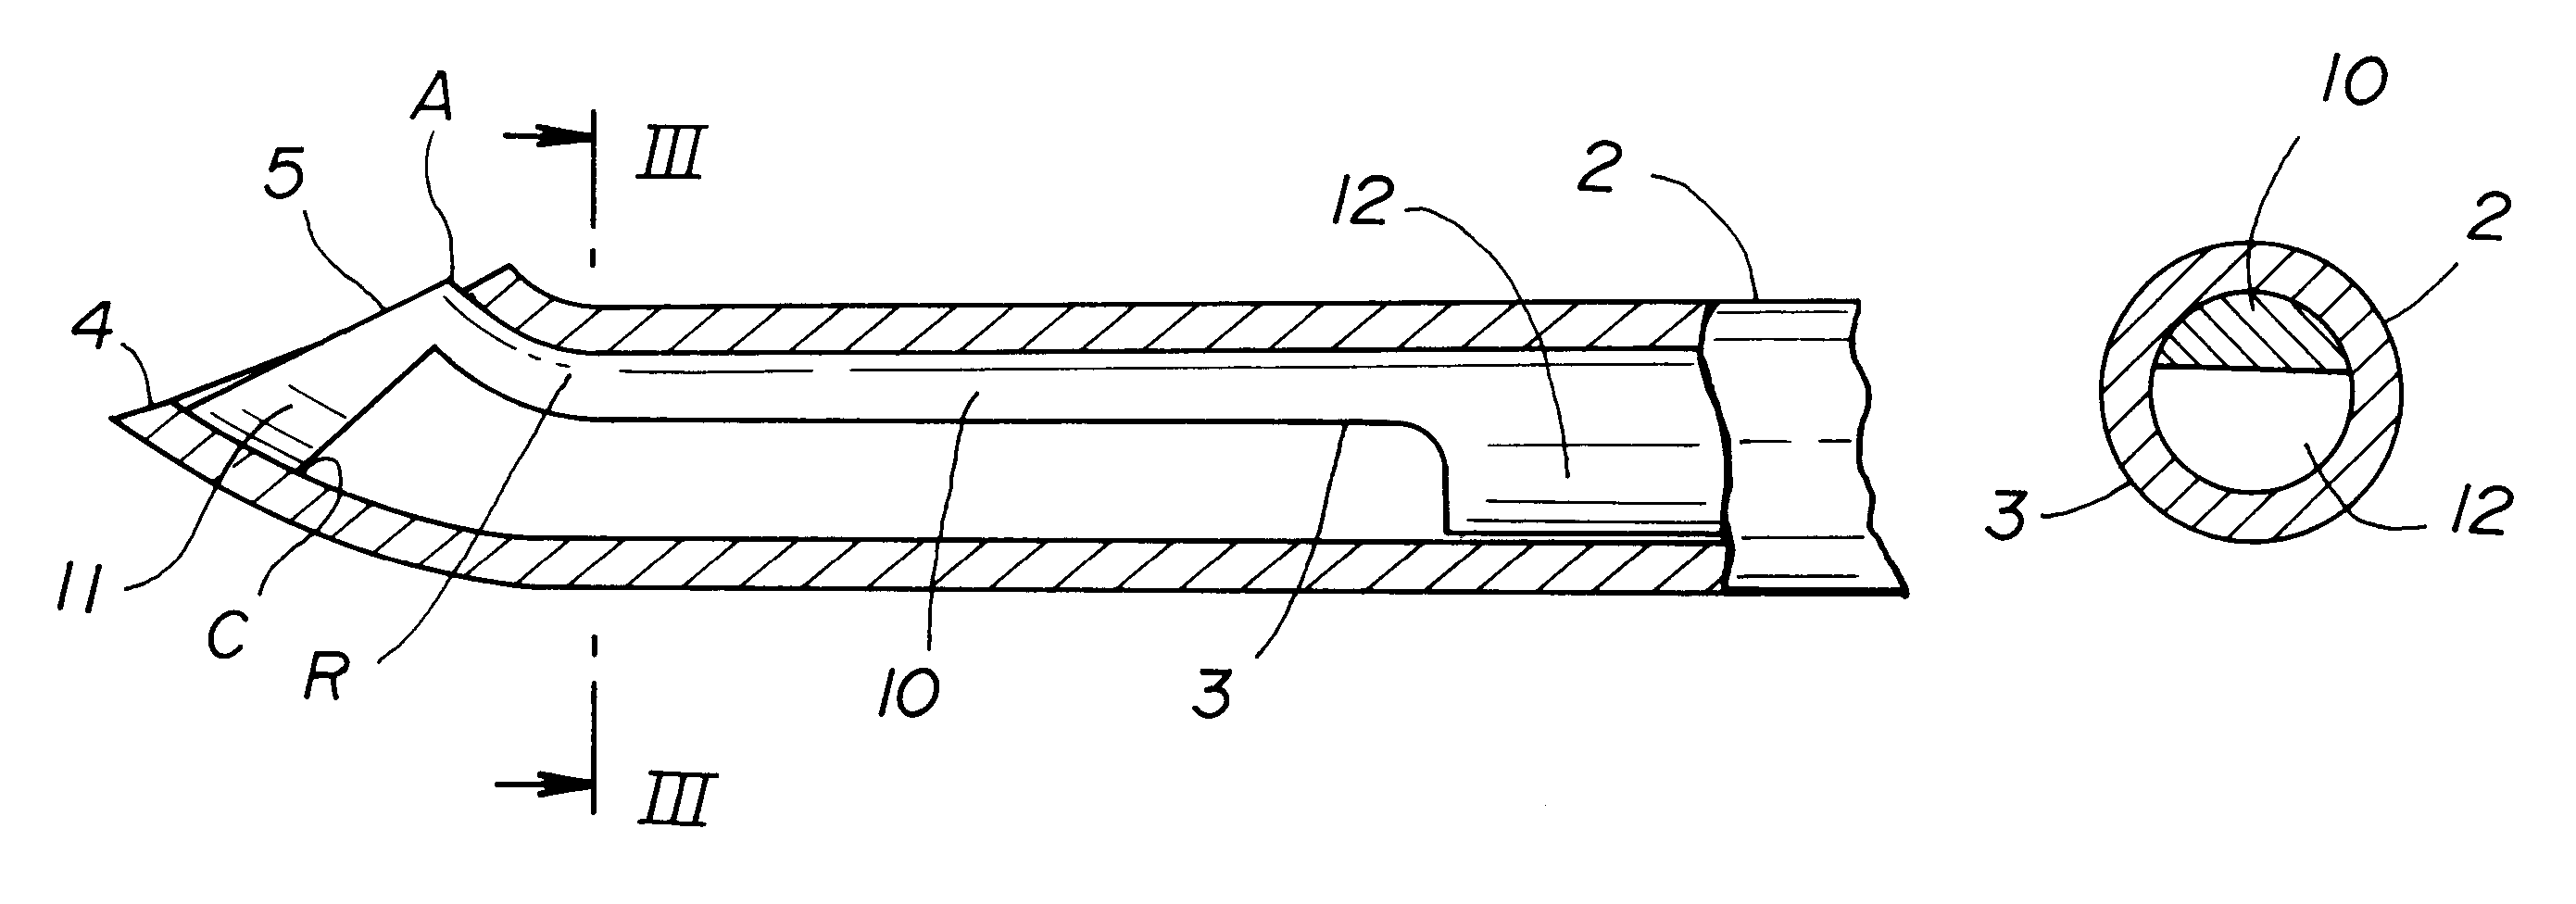 Mandrin of medical anesthetic needle and method of manufacturing same